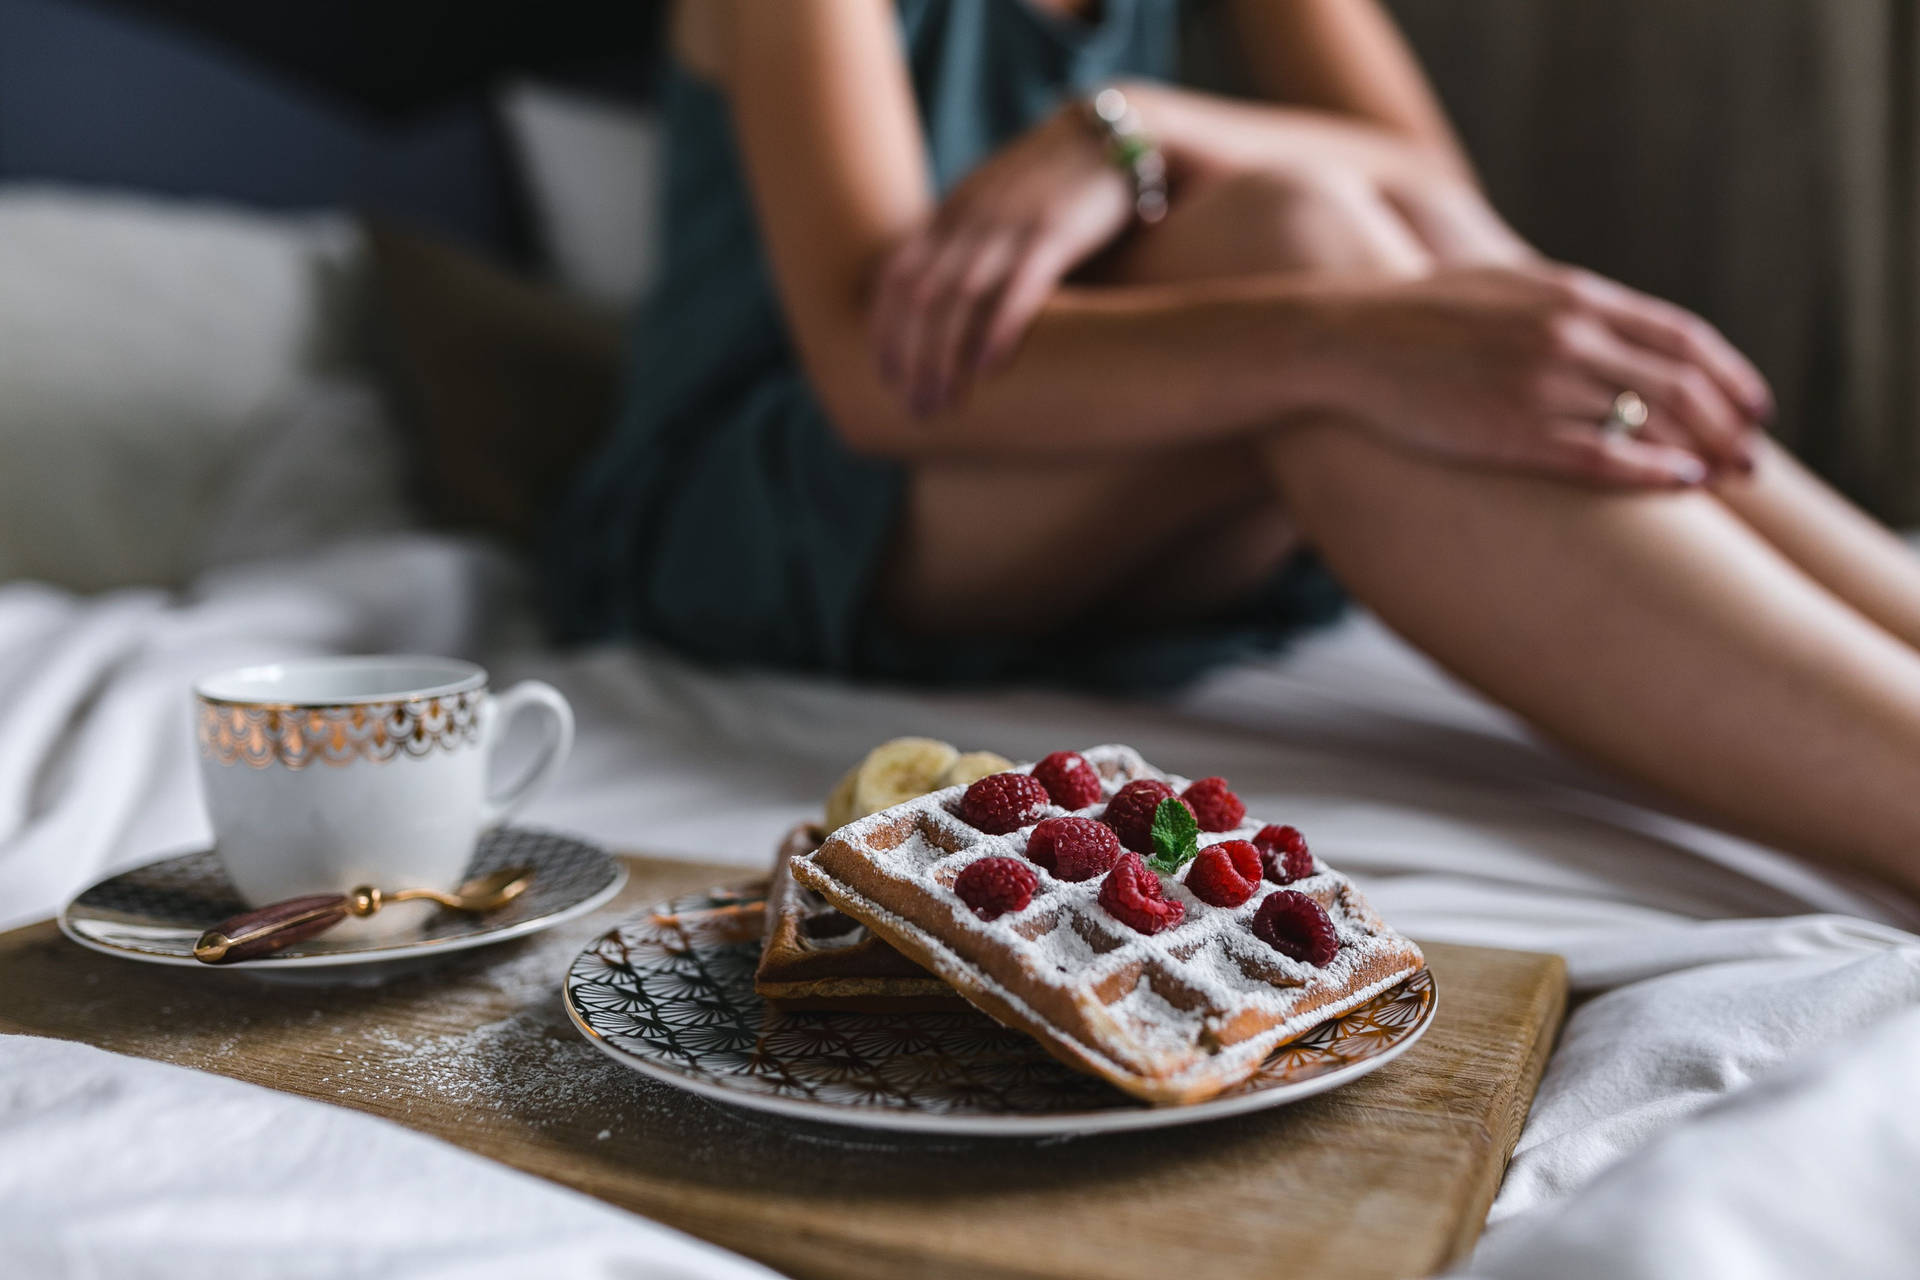 Caption: Crisp Golden Waffles Served For A Relaxing Breakfast In Bed Background